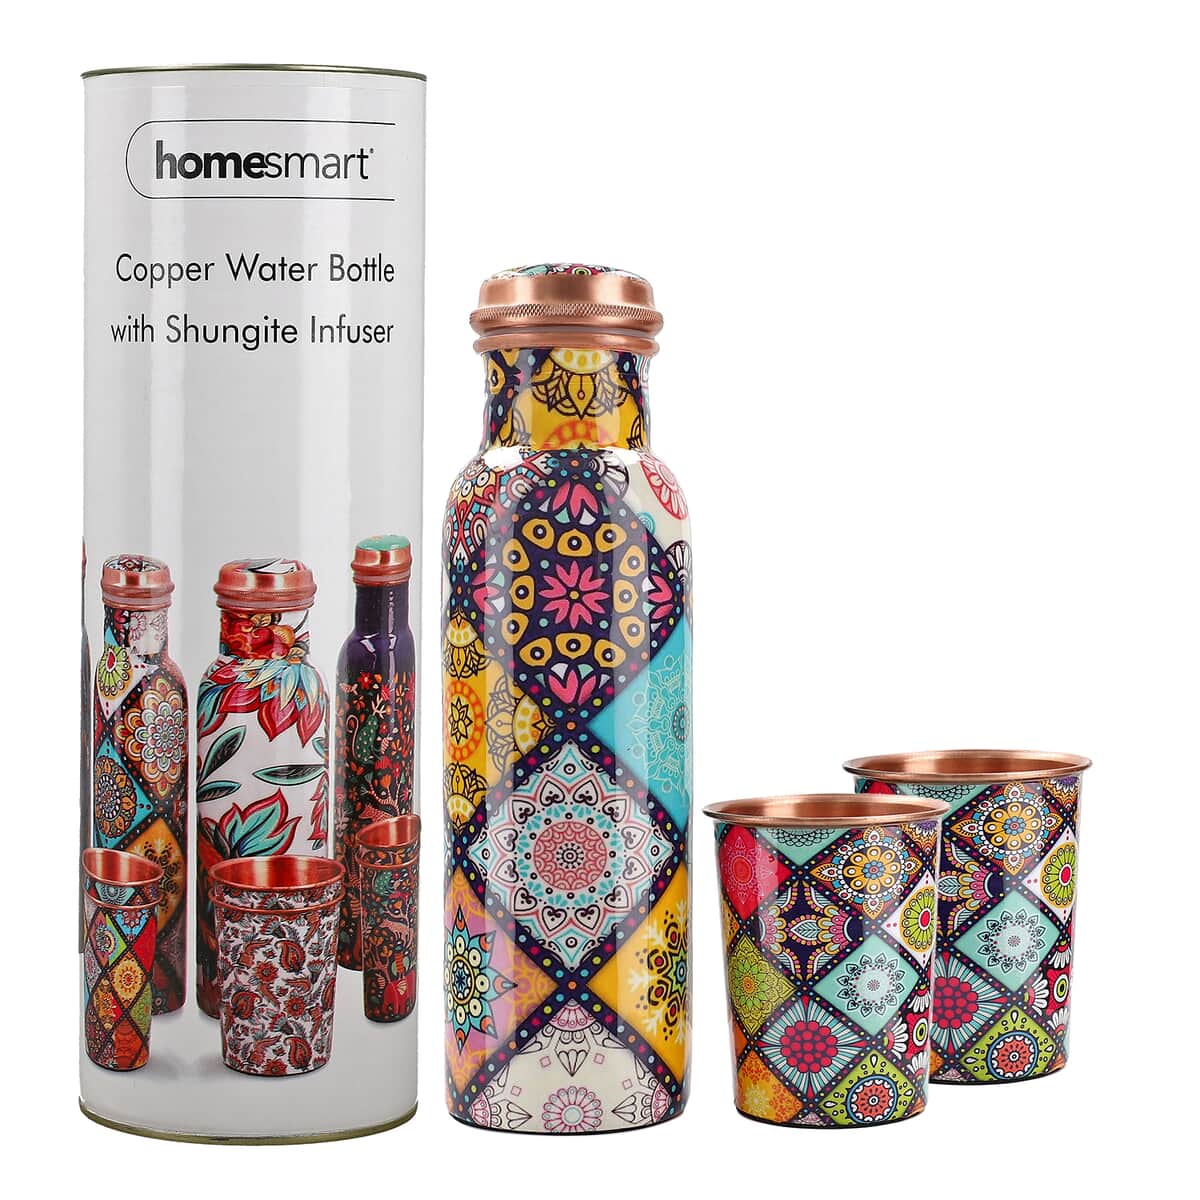 Homesmart Multi Color Gift Set of 3 Printed Copper Bottle with Shungite Infuser and 2 Matching Glass image number 0